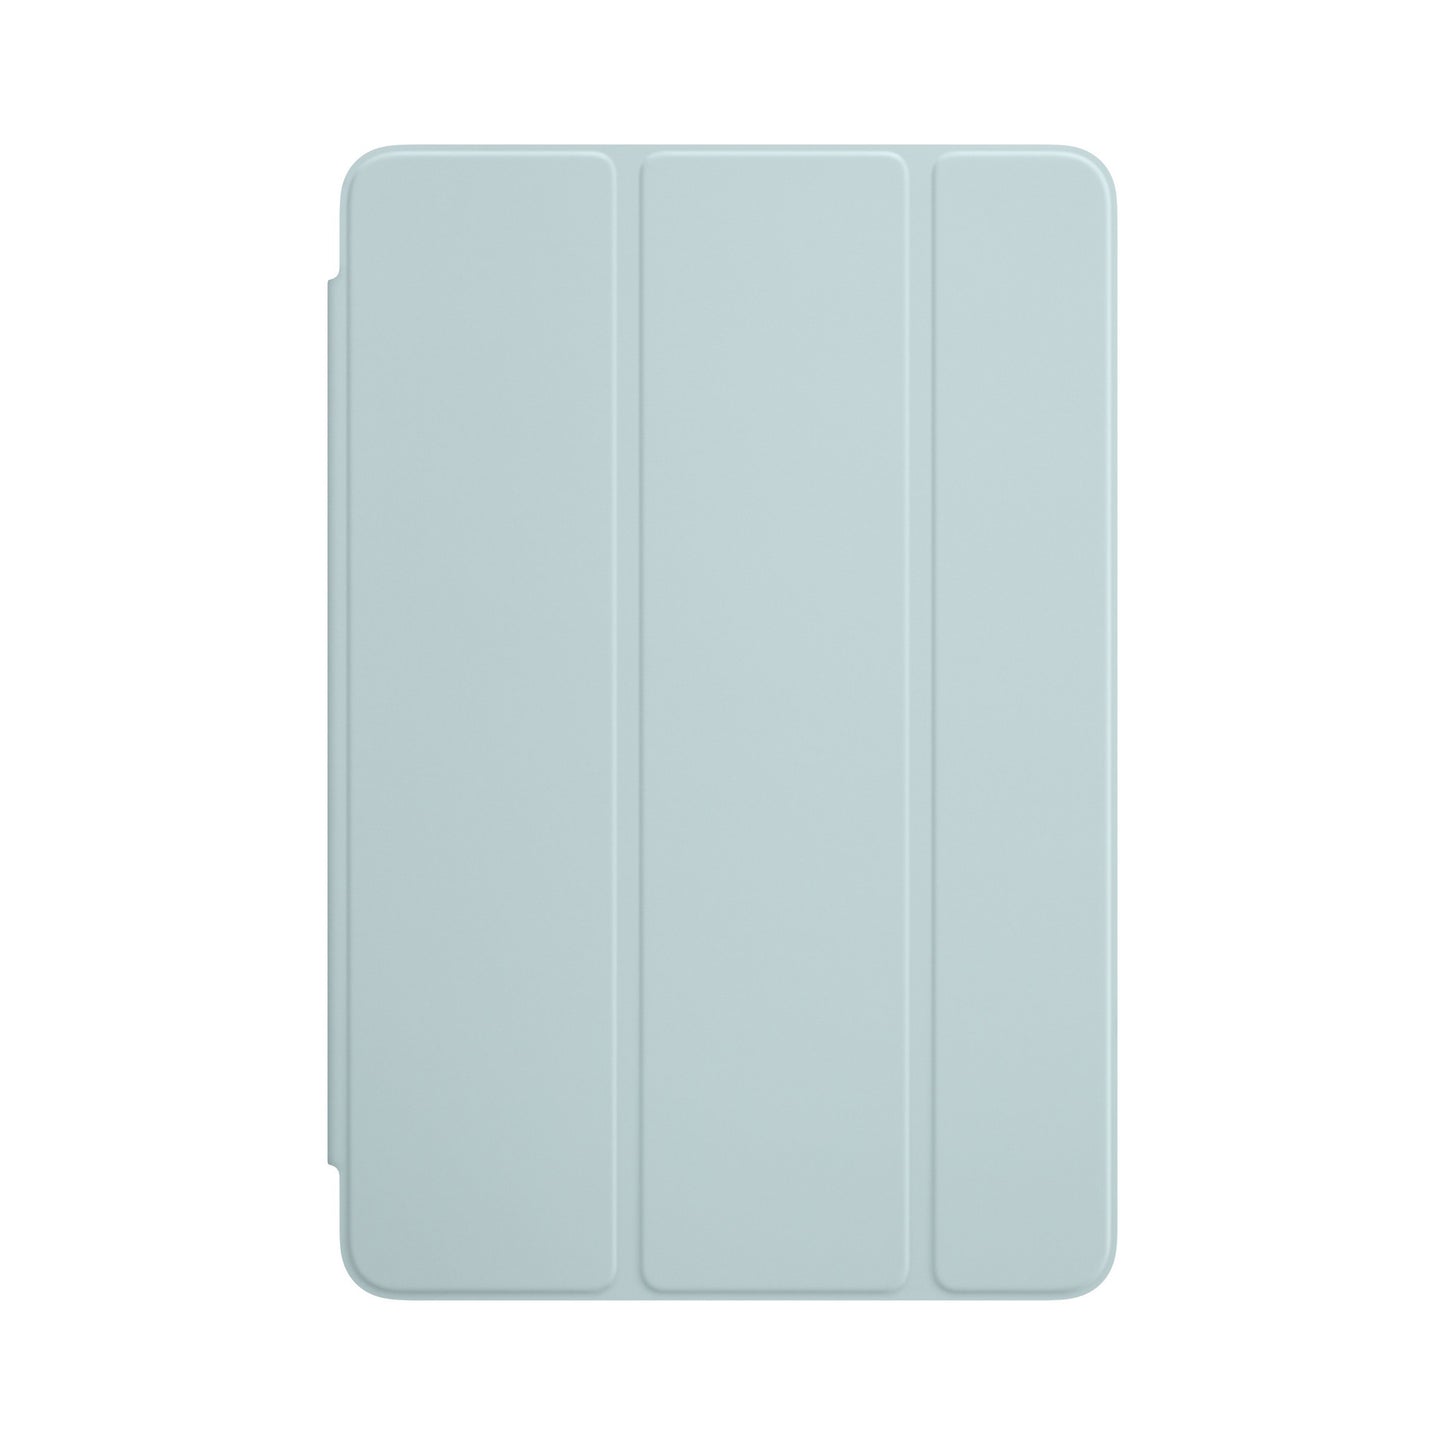 Apple Cover Cover for iPad mini 4 - Turquoise